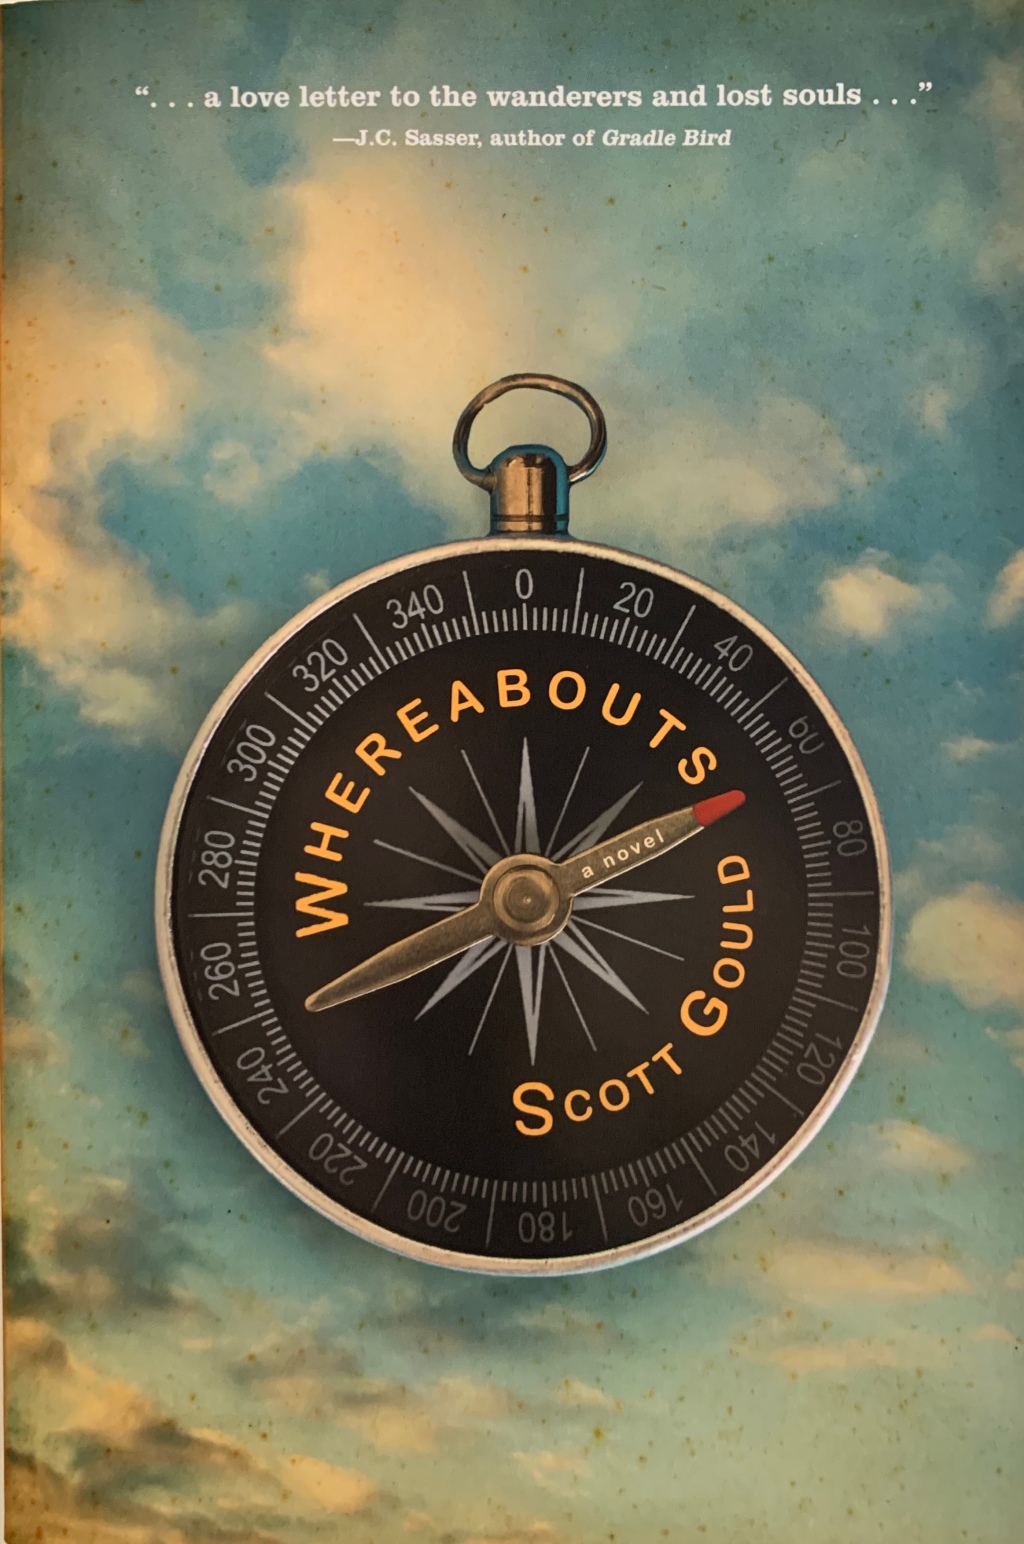 A Review of Whereabouts, A Novel by Southern Author, Scott Gould